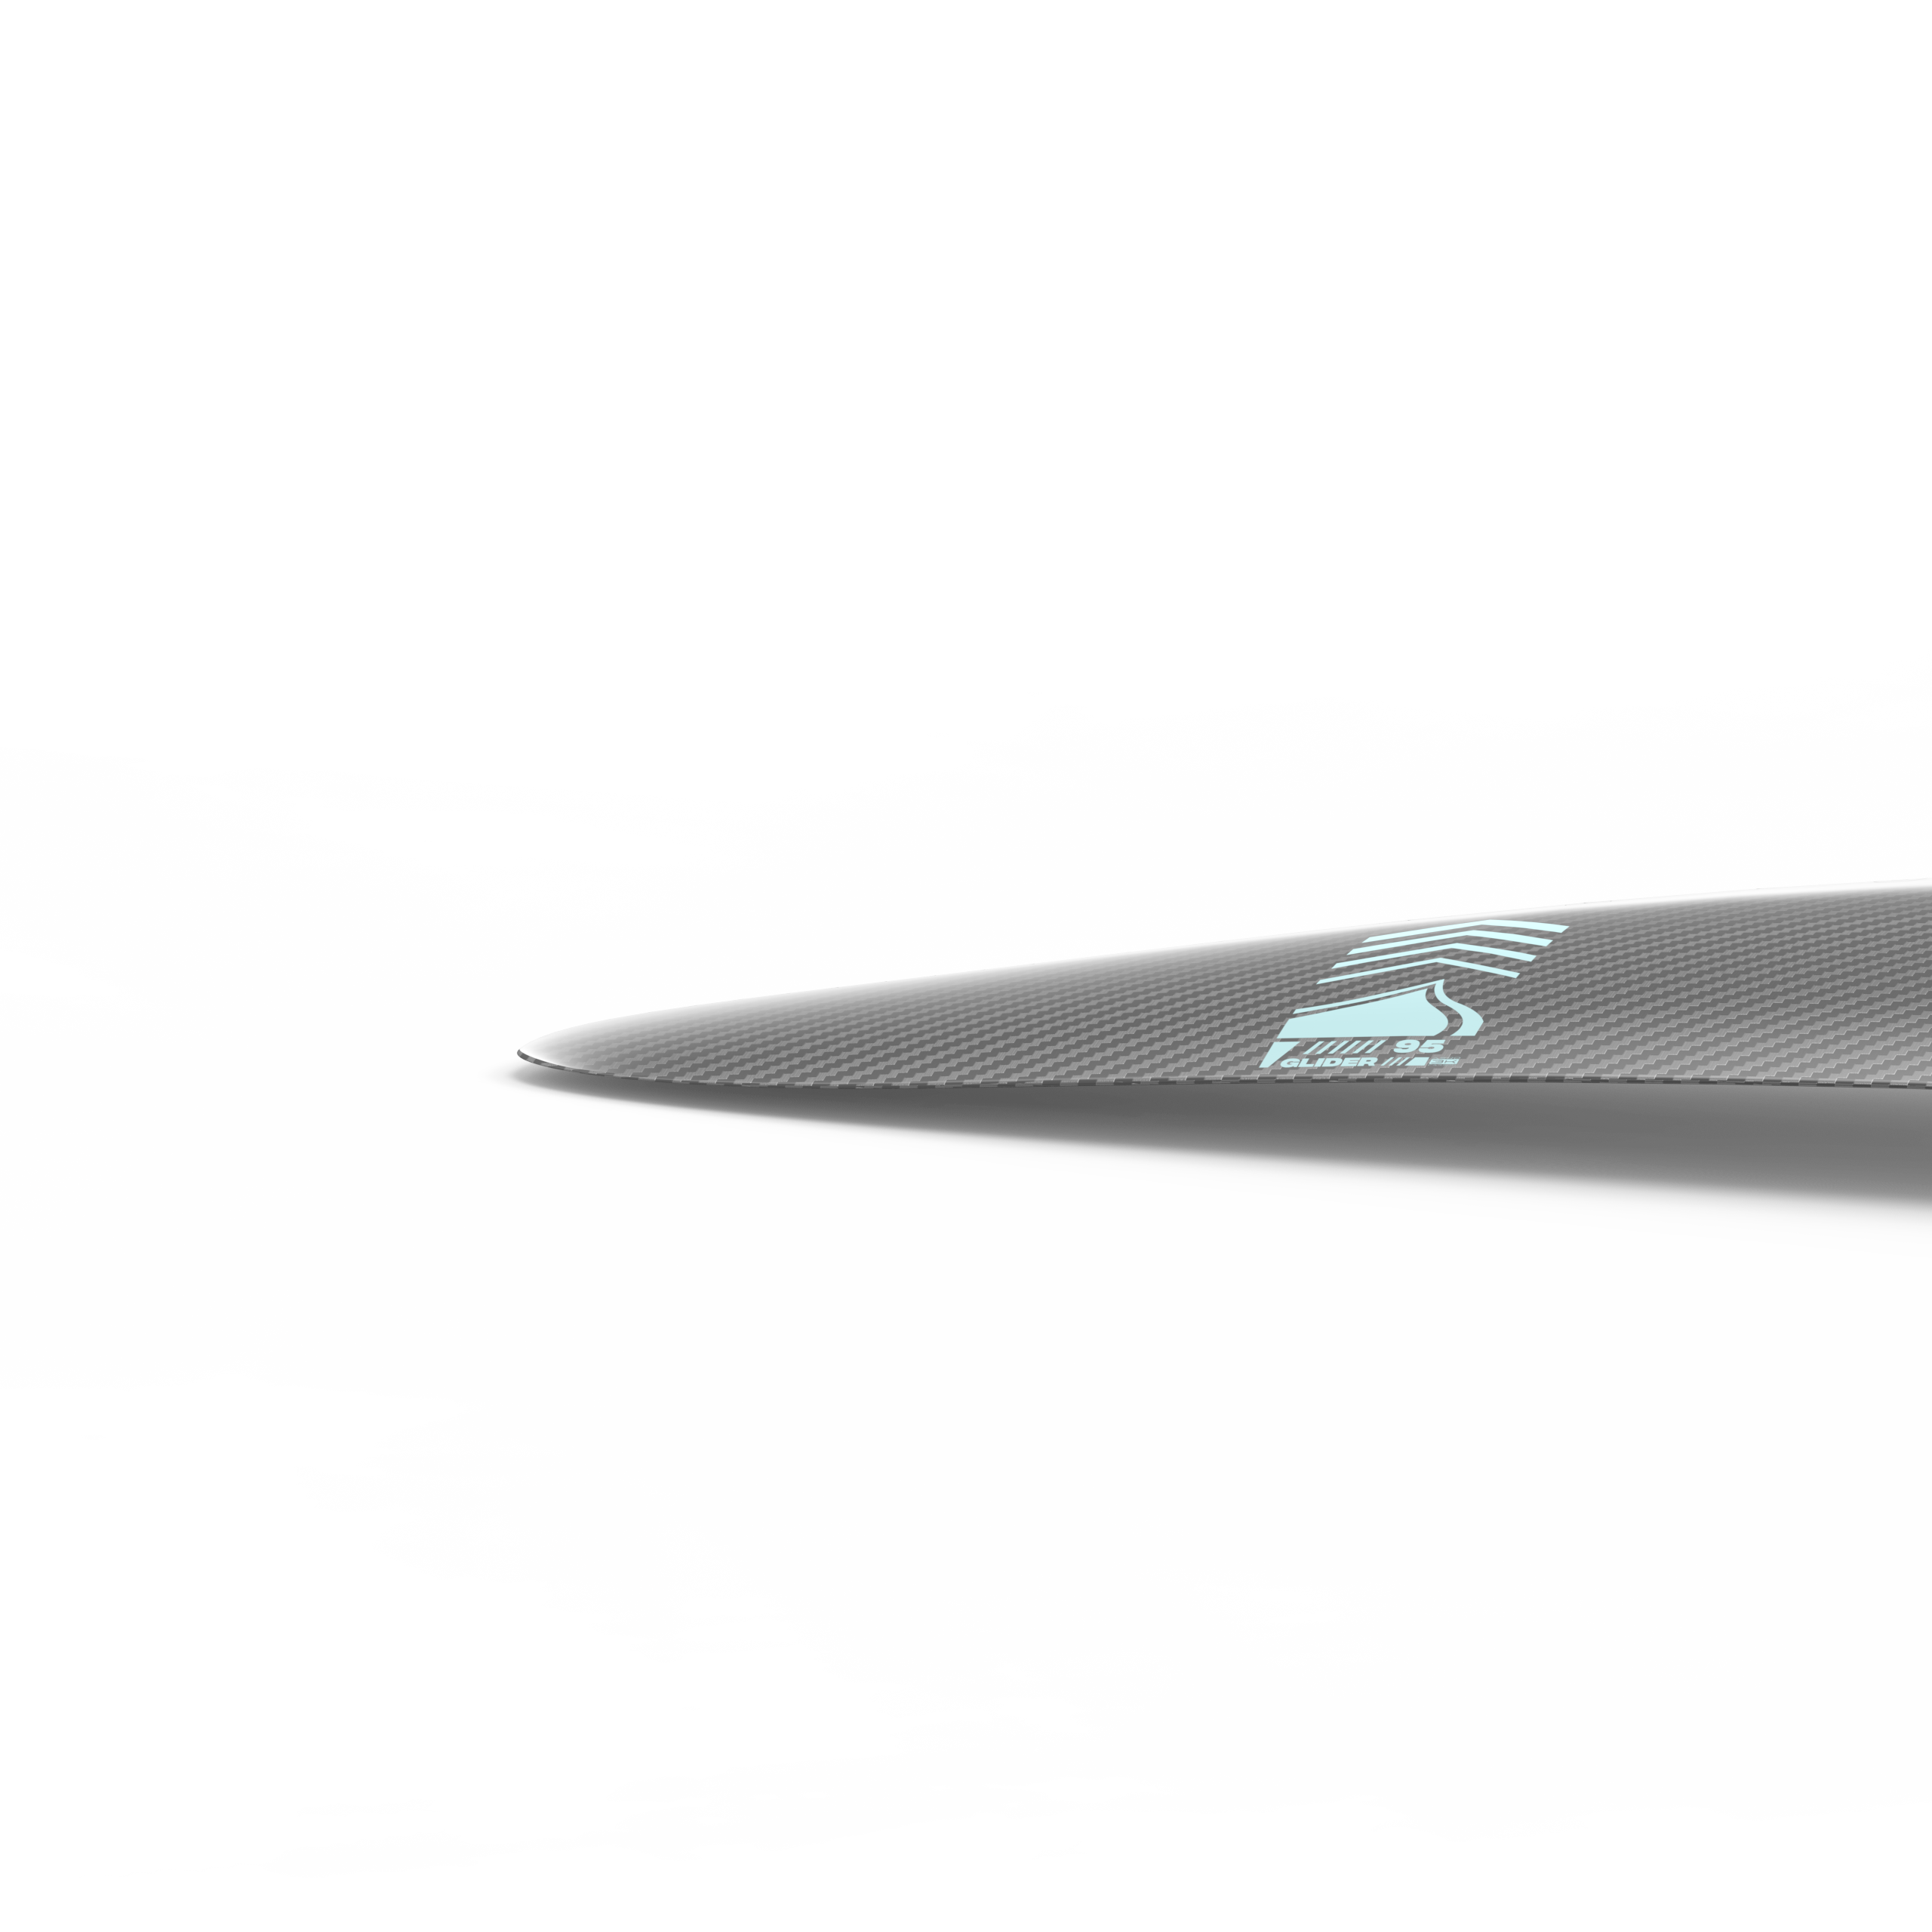 Liquid Force Glider 95, a carbon fiber blade, is featured in the png & psd images showcasing boat wakes and incorporating carbon fibre material.